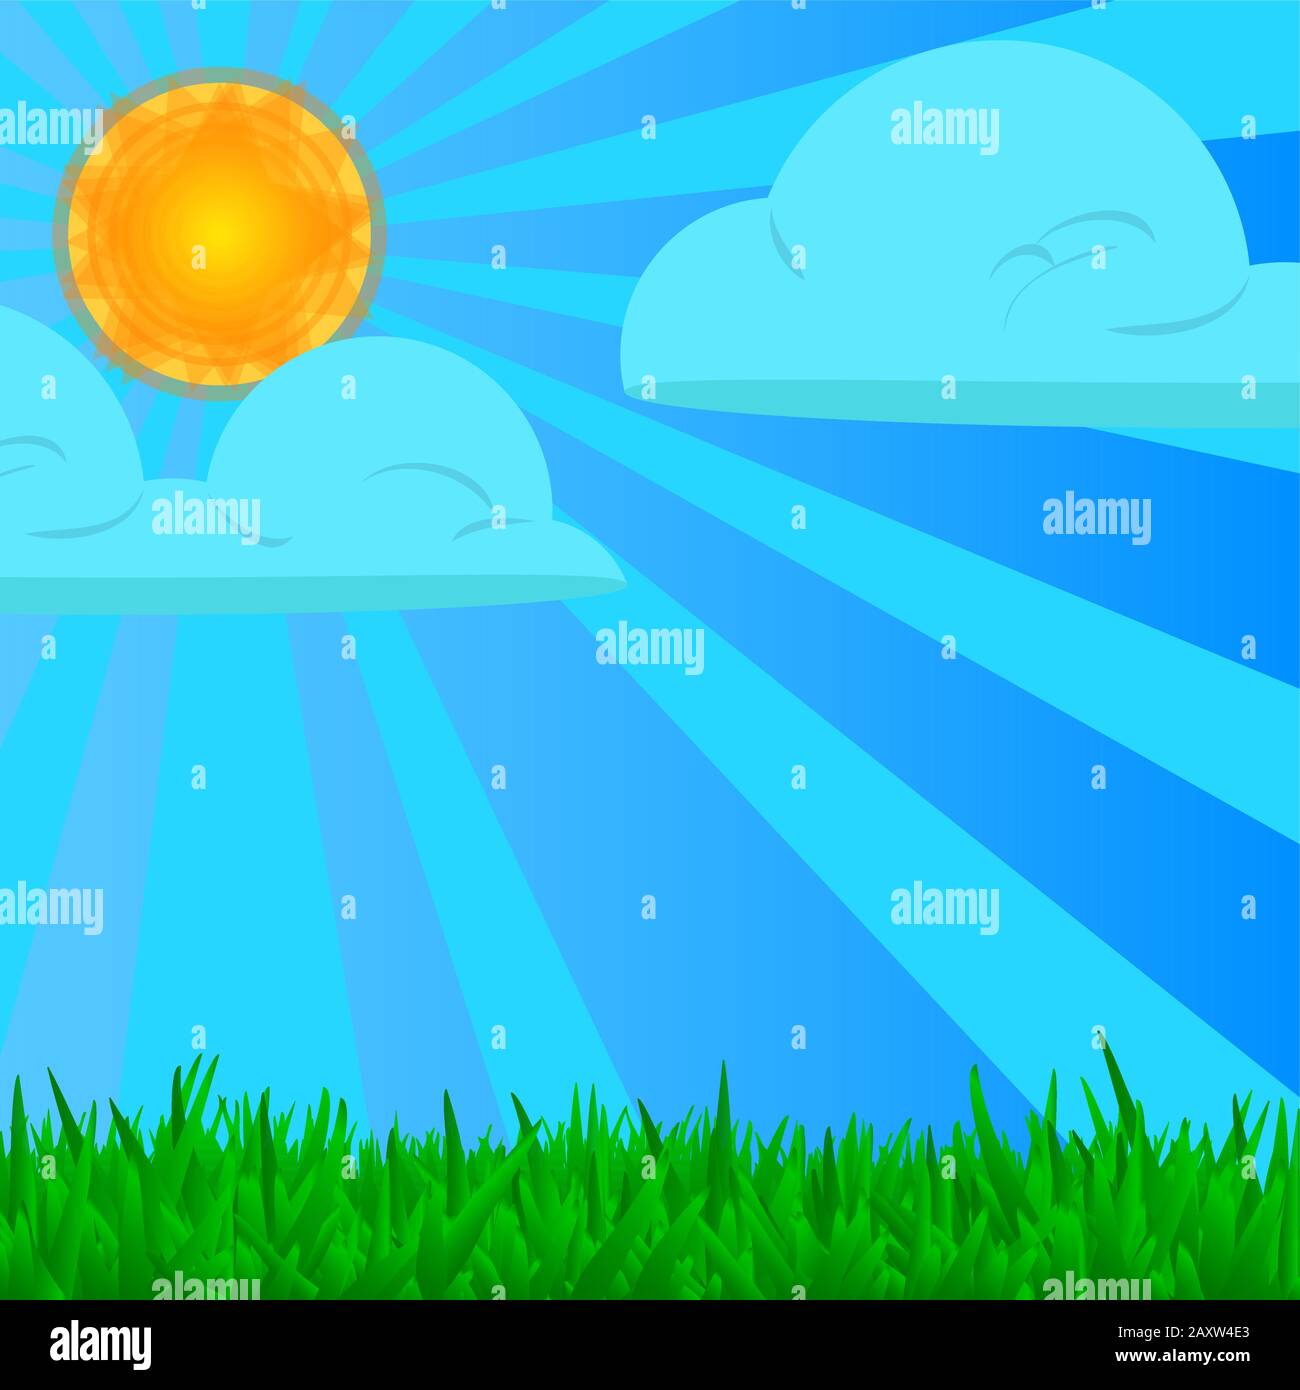 Flat Design Grass Landscape With Hills Clouds And Glowing Sun Under Blue  Sky Vector Stock Illustration - Download Image Now - iStock